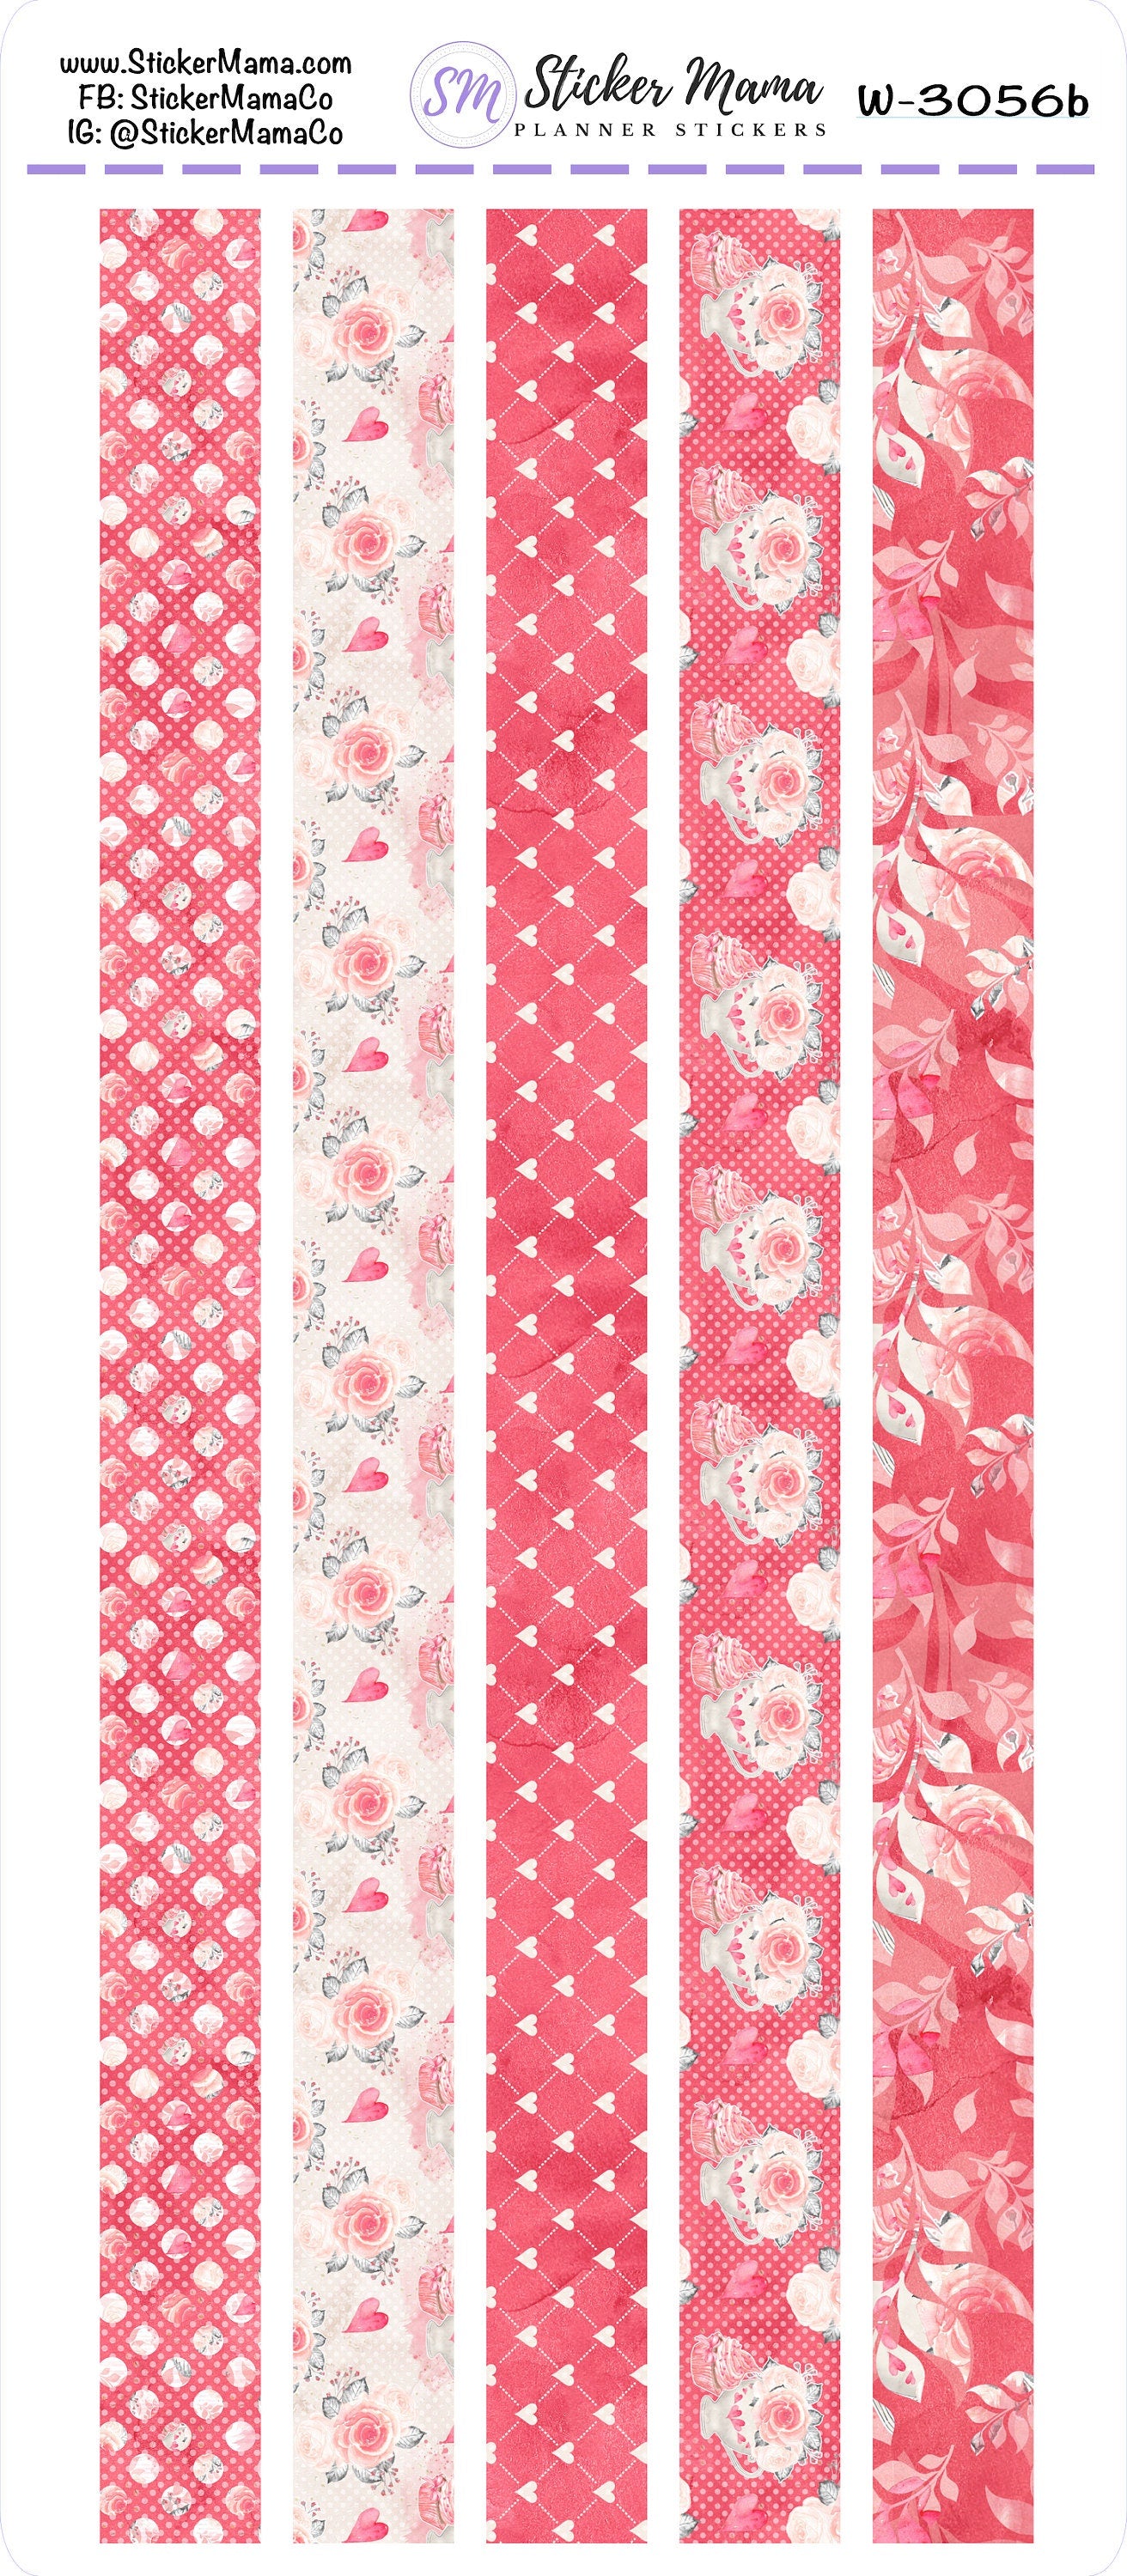 W-3056 - WASHI STICKERS - Sweet Valentine's - Planner Stickers - Washi for Planners